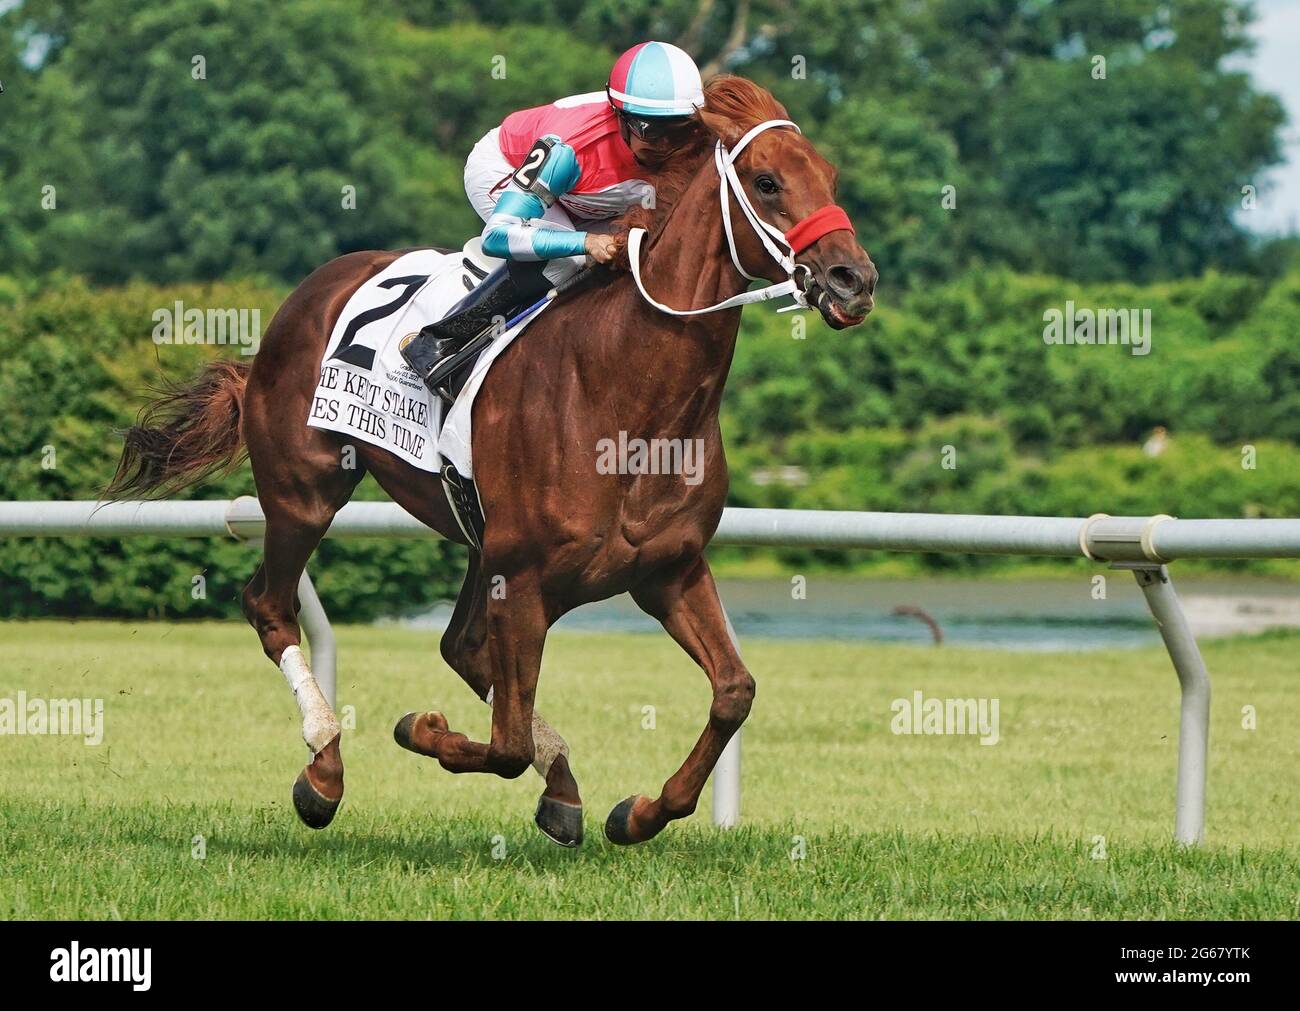 Wilmington, DE, USA. 3rd July, 2021. JULY 03, 2021: Yes This Time, #2, ridden by jockey Joe Bravo wins the Kent Stakes on July 03, 2021 at Delaware park in Willington, Delaware. Scott SerioEclipse SportswireCSM/Alamy Live News Stock Photo